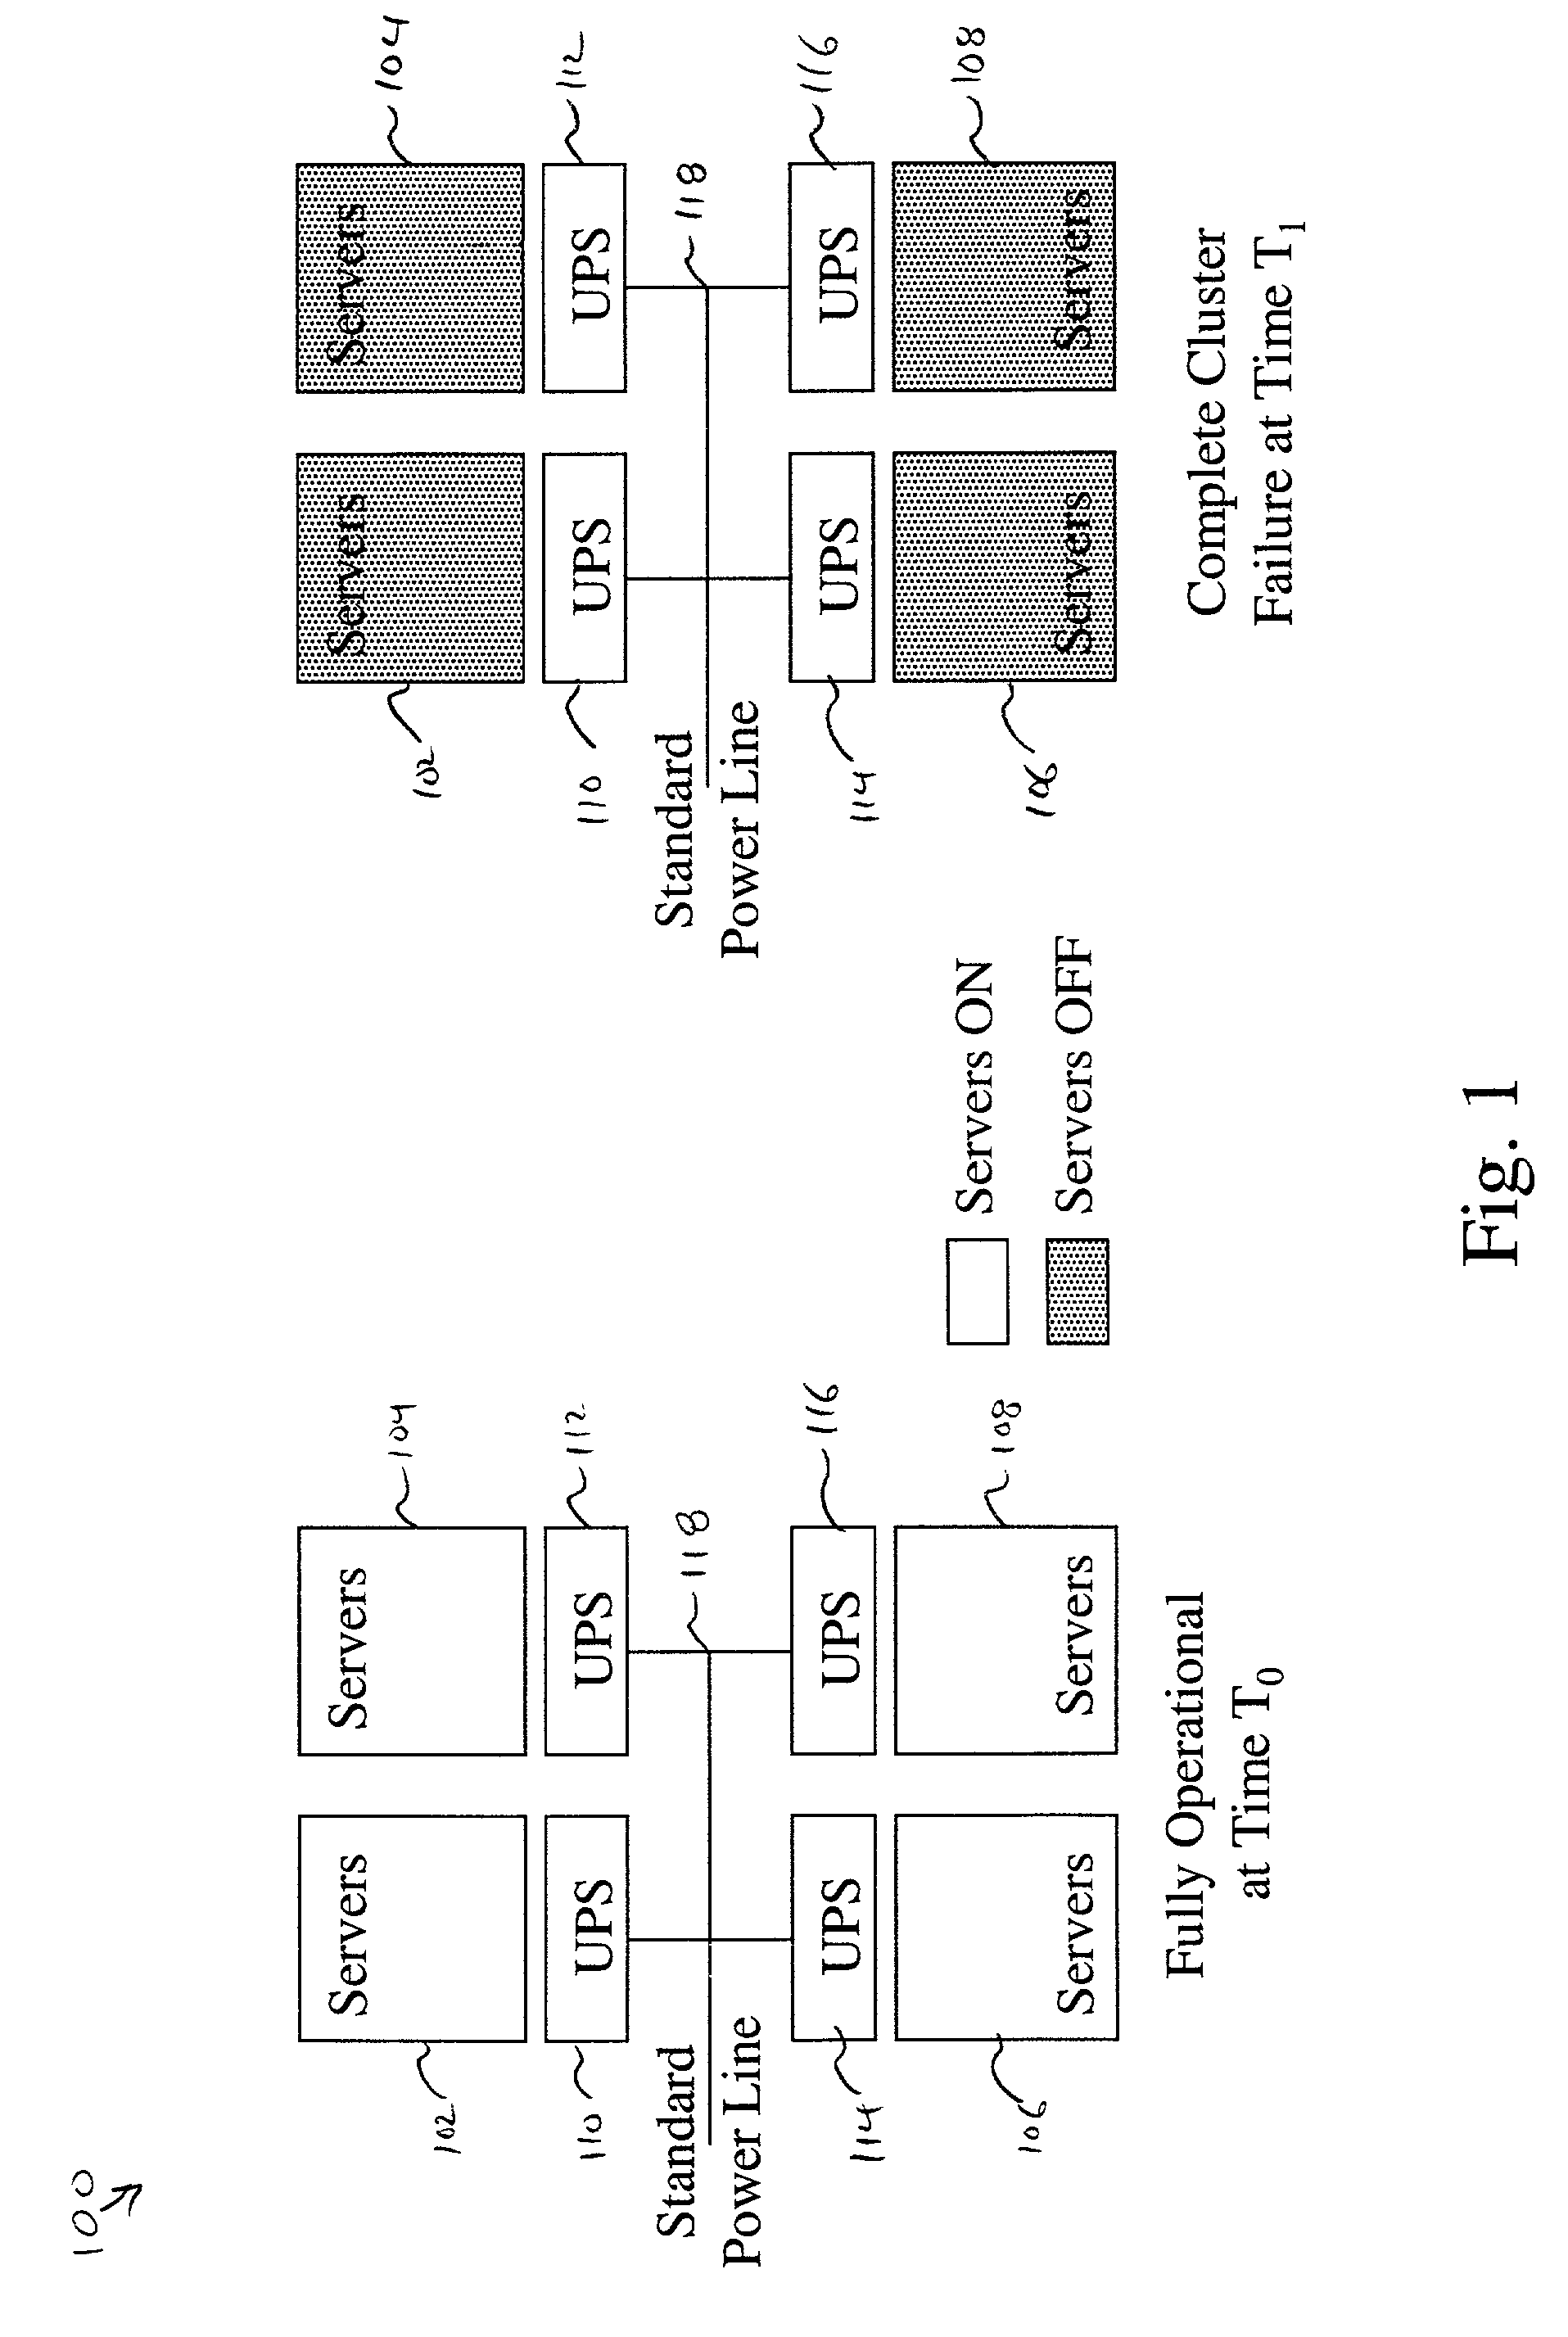 Method for diverting power reserves and shifting activities according to activity priorities in a server cluster in the event of a power interruption